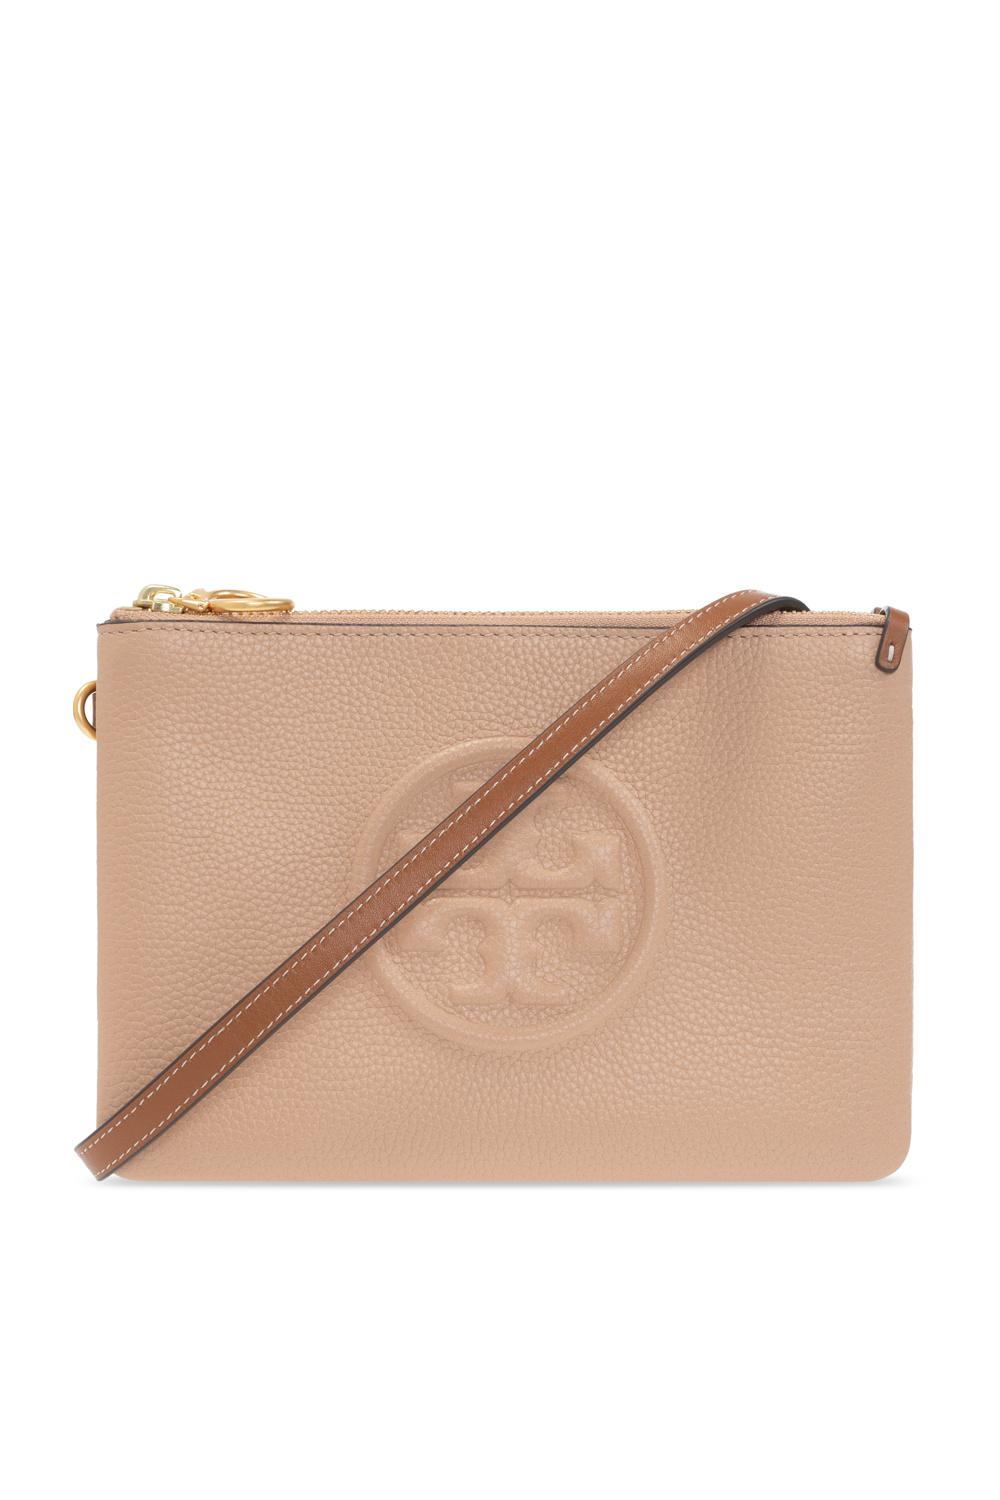 Tory Burch Leather Perry Bombe Double-zip Crossbody | Lyst